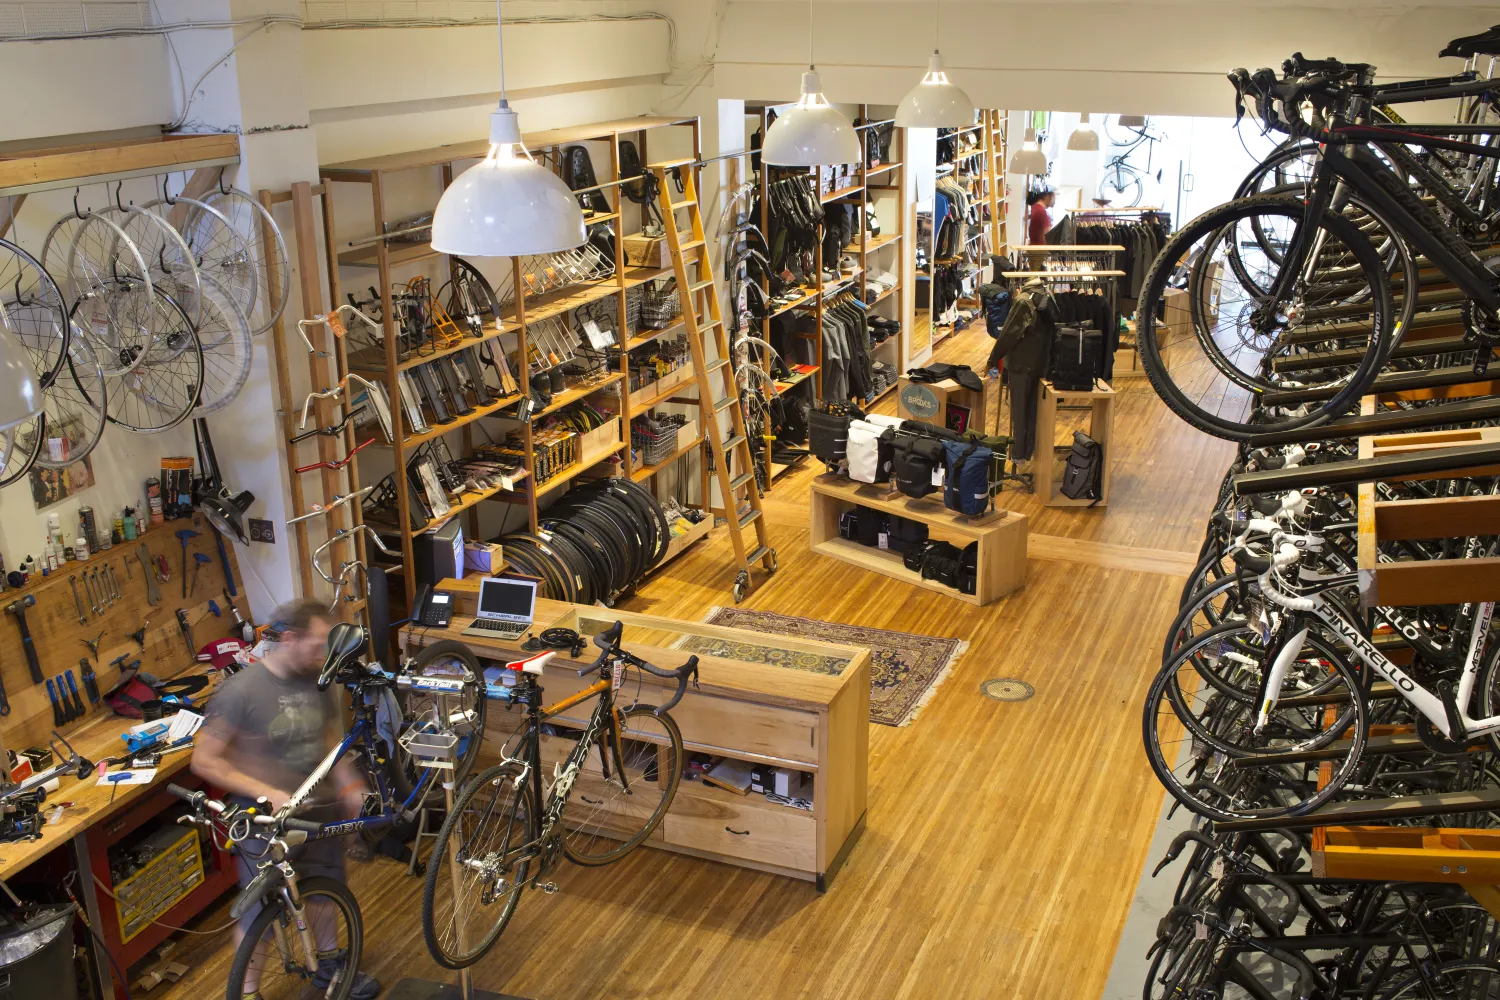 Interior view of the bicycle shop Huckleberry Bicycles in San Francisco.